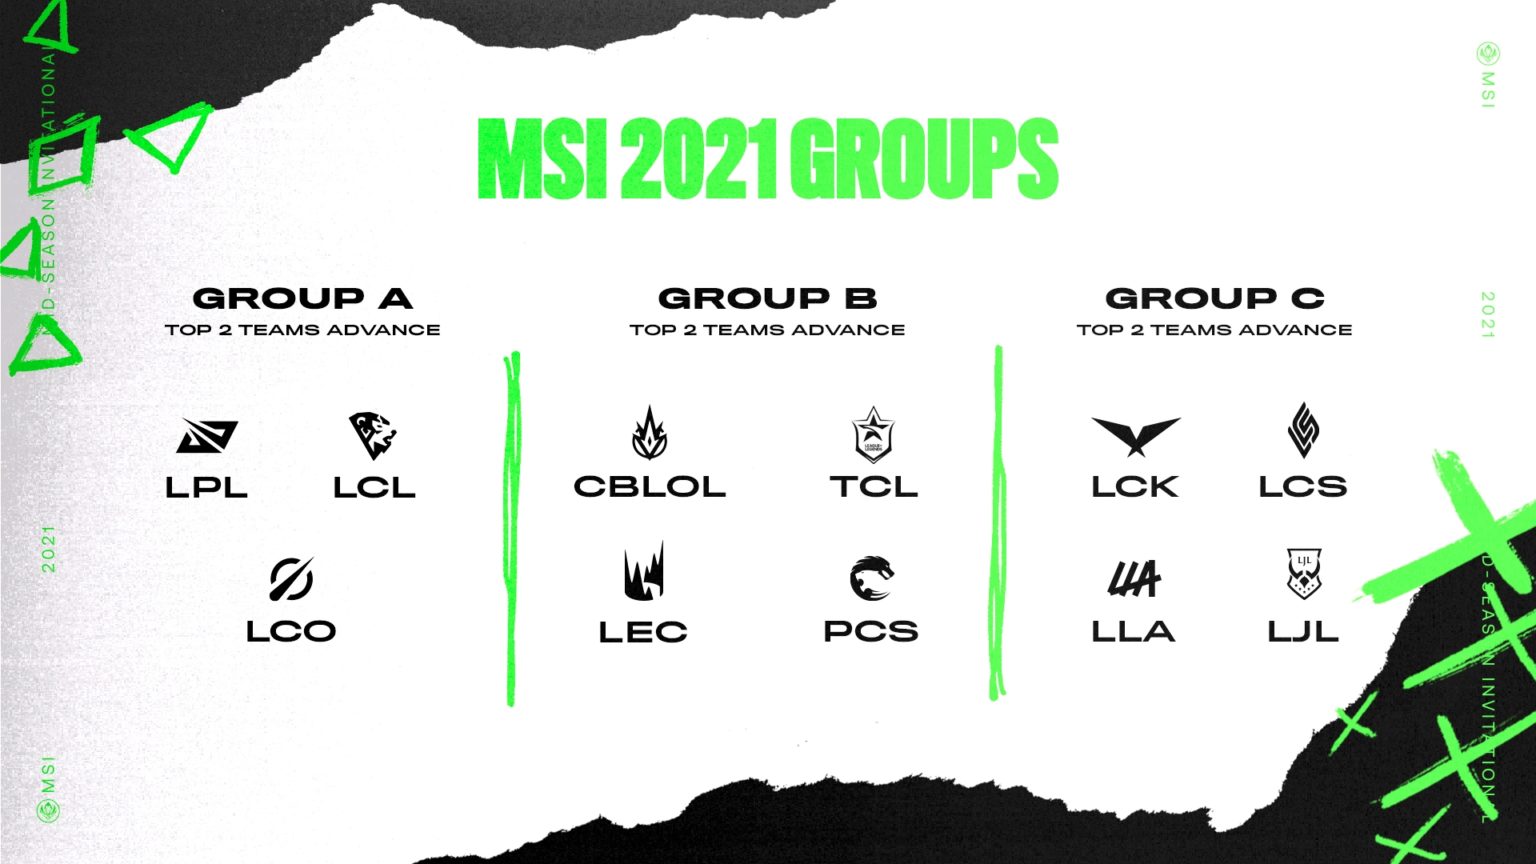 RNG and UOL are the likely winners of Group A at MSI.